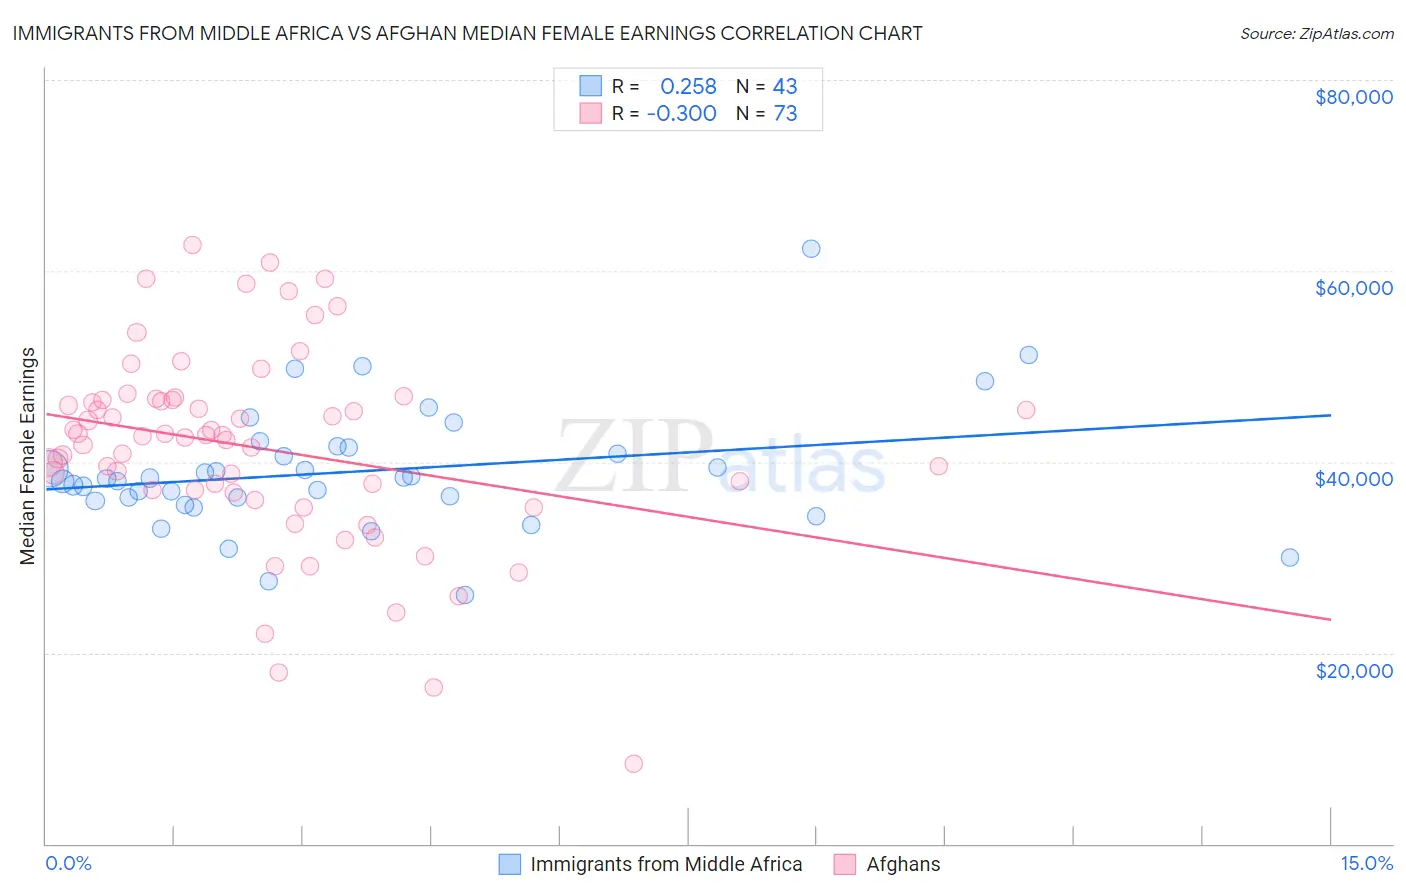 Immigrants from Middle Africa vs Afghan Median Female Earnings